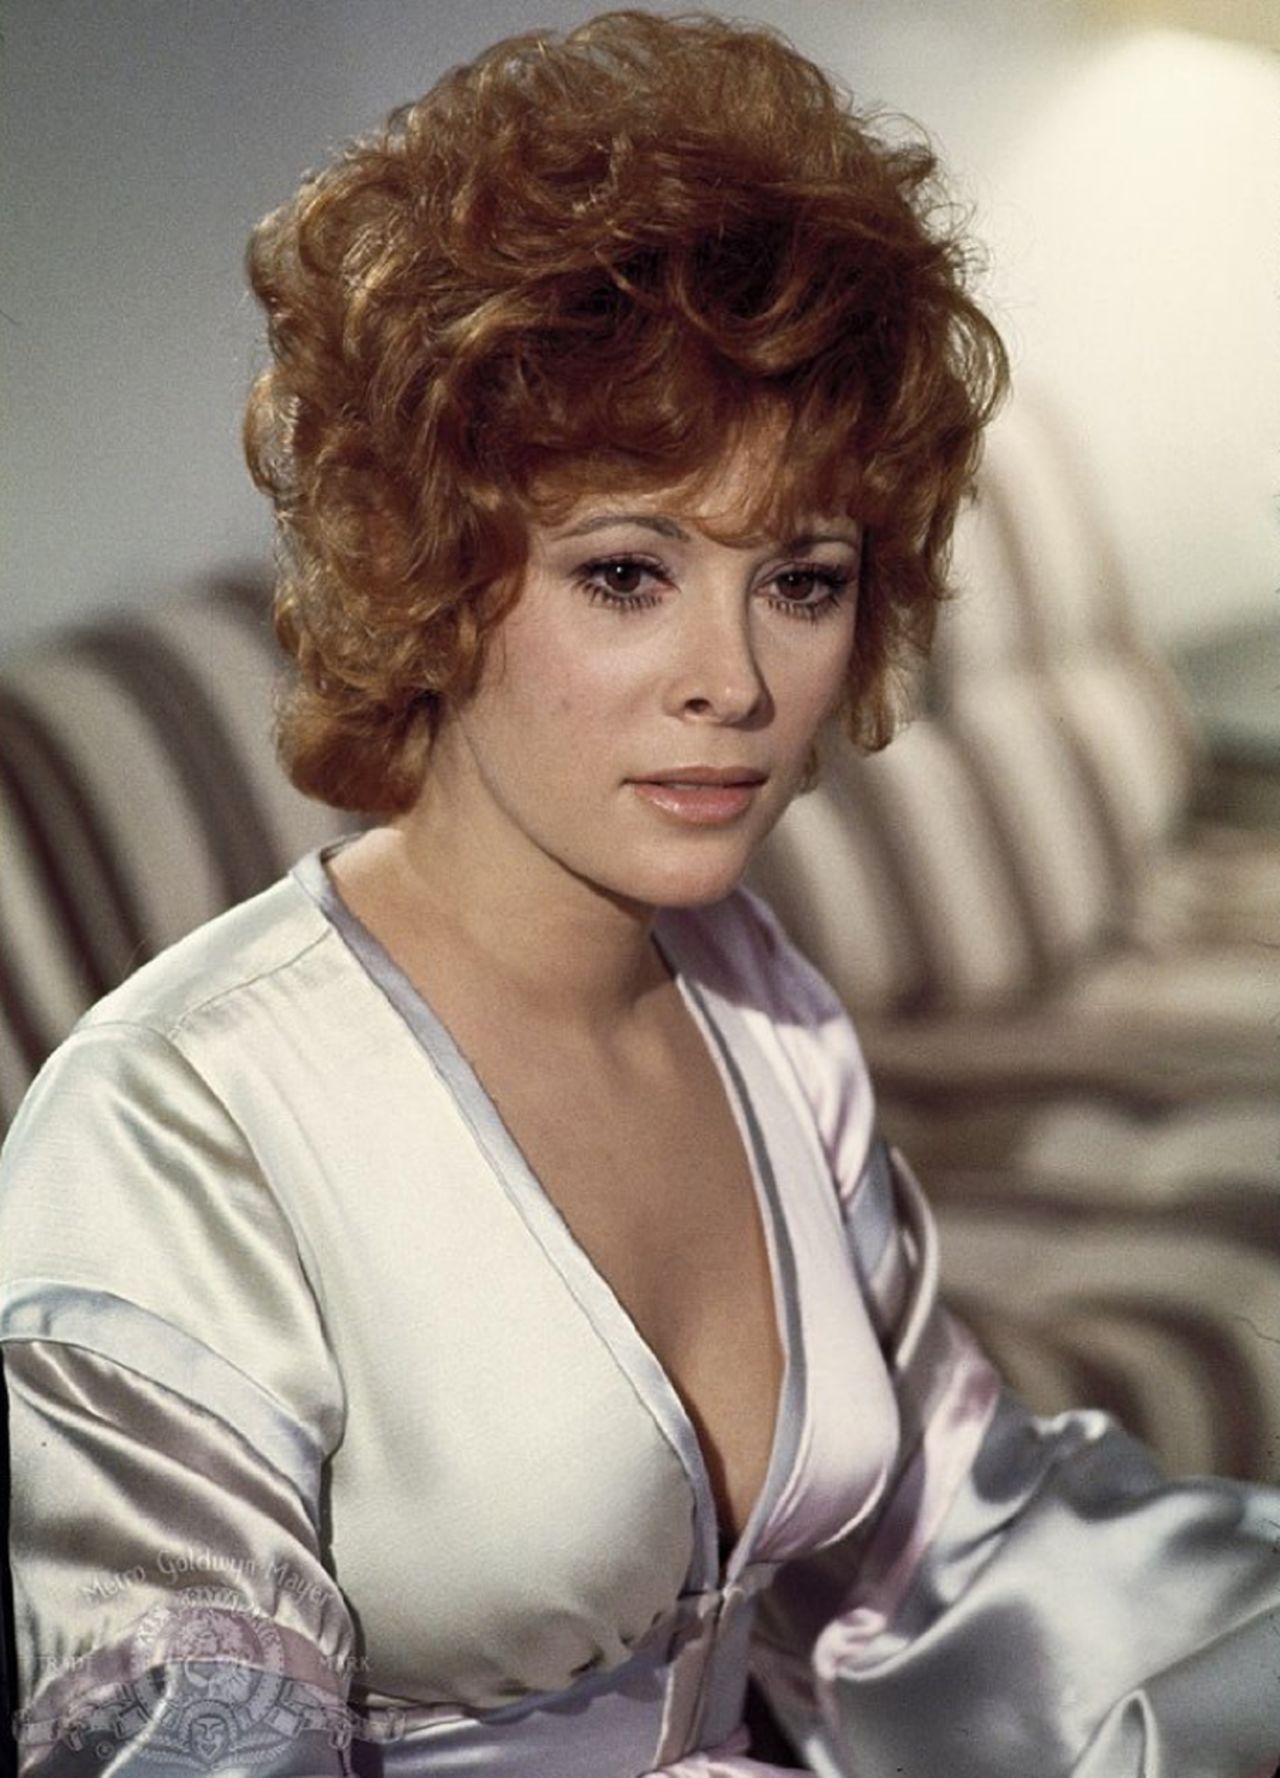 Jill St. John played diamond smuggler Tiffany Case in "Diamonds Are Forever." Bond is pretending to be Peter Franks when he and Case meet in the 1971 movie, which marked Connery's last turn as 007.